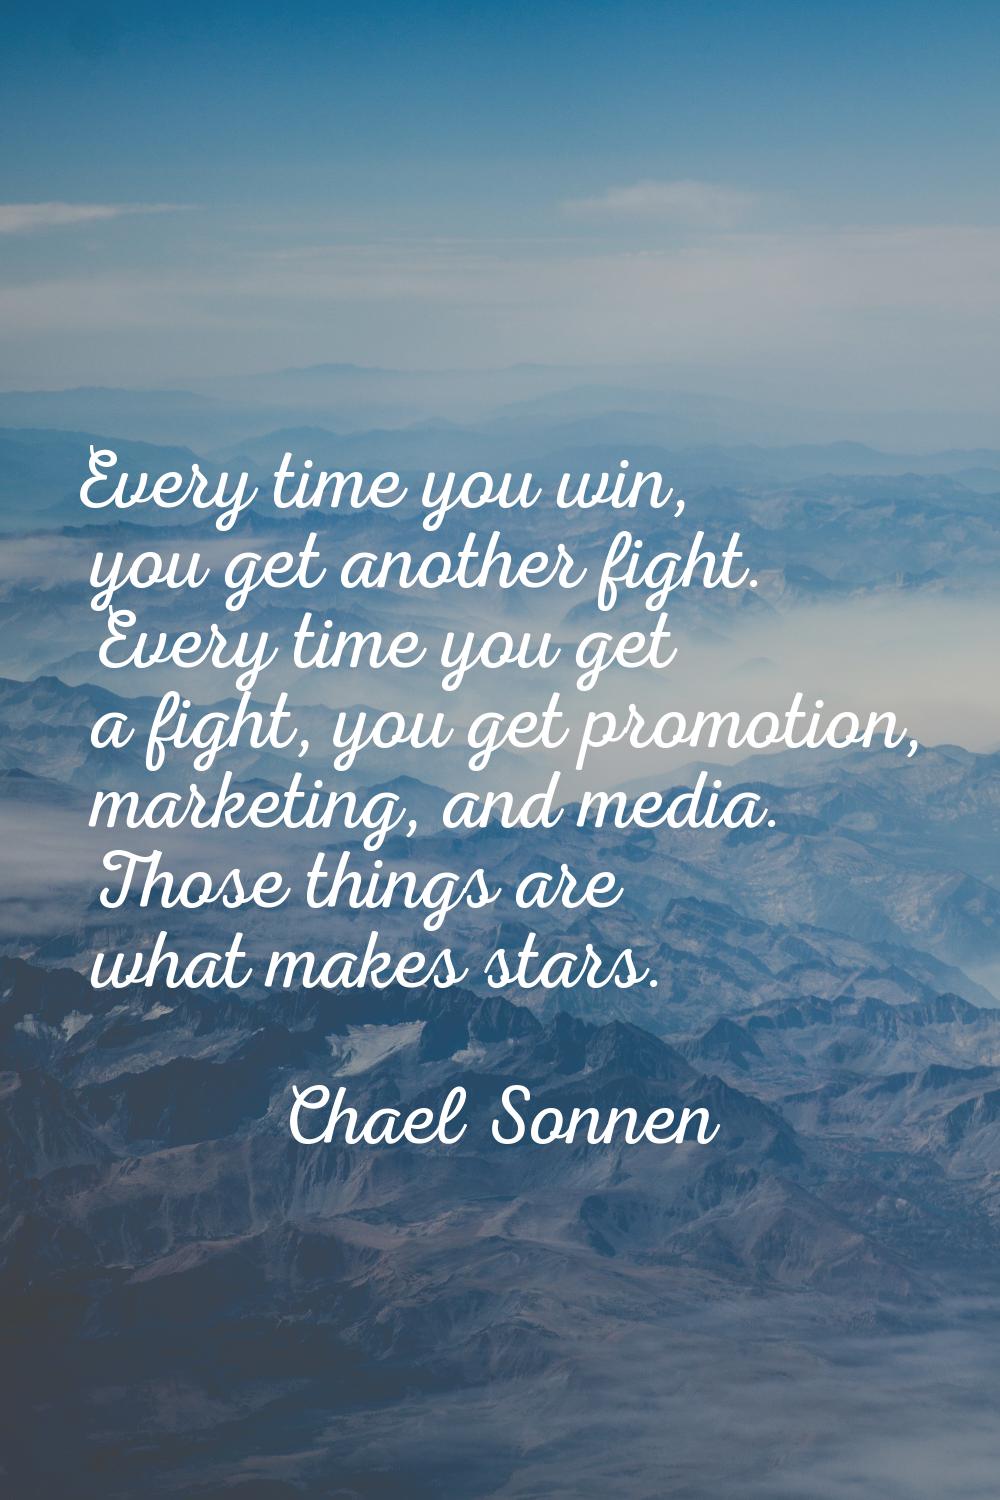 Every time you win, you get another fight. Every time you get a fight, you get promotion, marketing